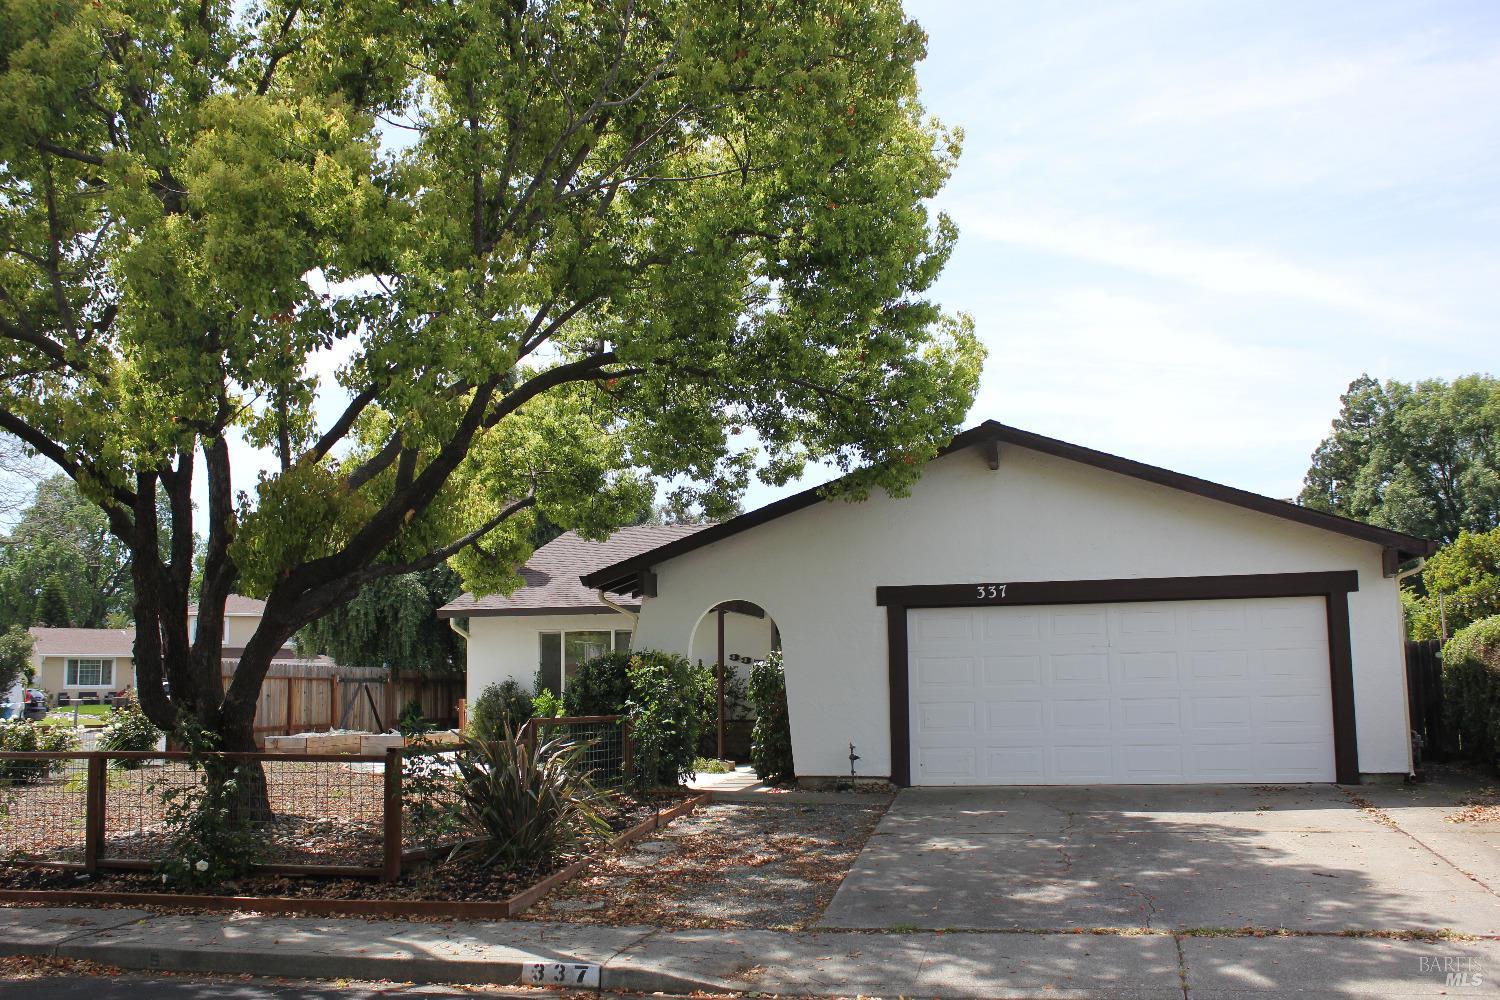 Photo of 337 Woodhaven Dr in Vacaville, CA